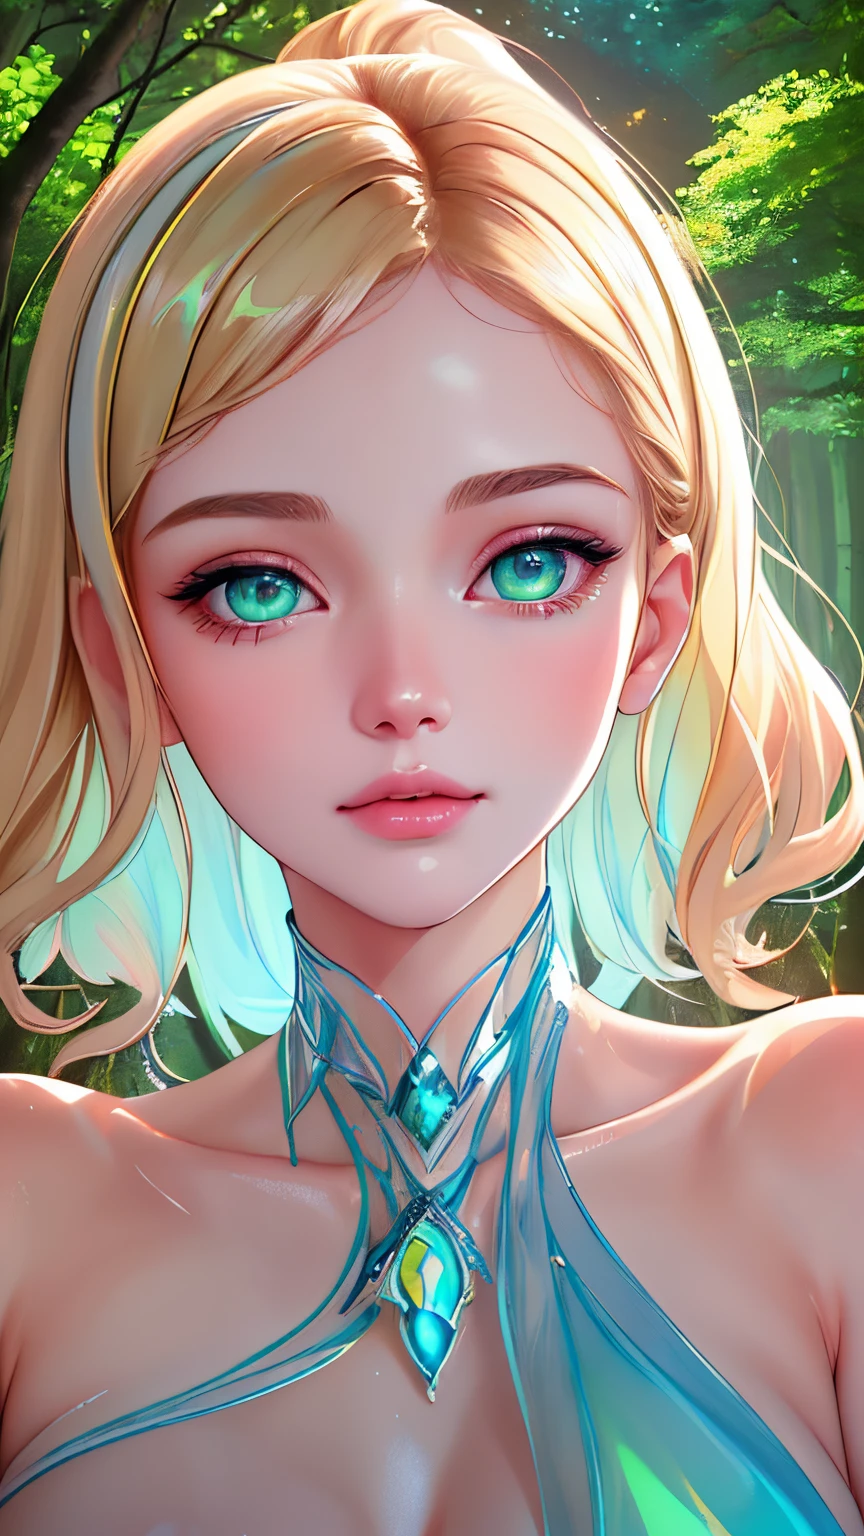 (masterpiece, best quality, ultra high res, extremely detailed, sharp focus, perfect feminine face, hourglass fogure), (face potrait:1.4), An ethereal female figure with delicate, luminescent wings, surrounded by glowing, magical creatures in an enchanted forest
Subsurface skin scattering, shiny skin, iridescent dress, detailed background, ([Elizabeth Olsen|Anne Hathaway|Selena Gomez]:0.8), round cute face, green eyes, close-up, amazing fine detail, Nikon D850 film stock photograph Kodak Portra 400 camera f1.6 lens, rich colors, lifelike texture, dramatic lighting, unreal engine, trending on ArtStation, cinestill 800 tungsten